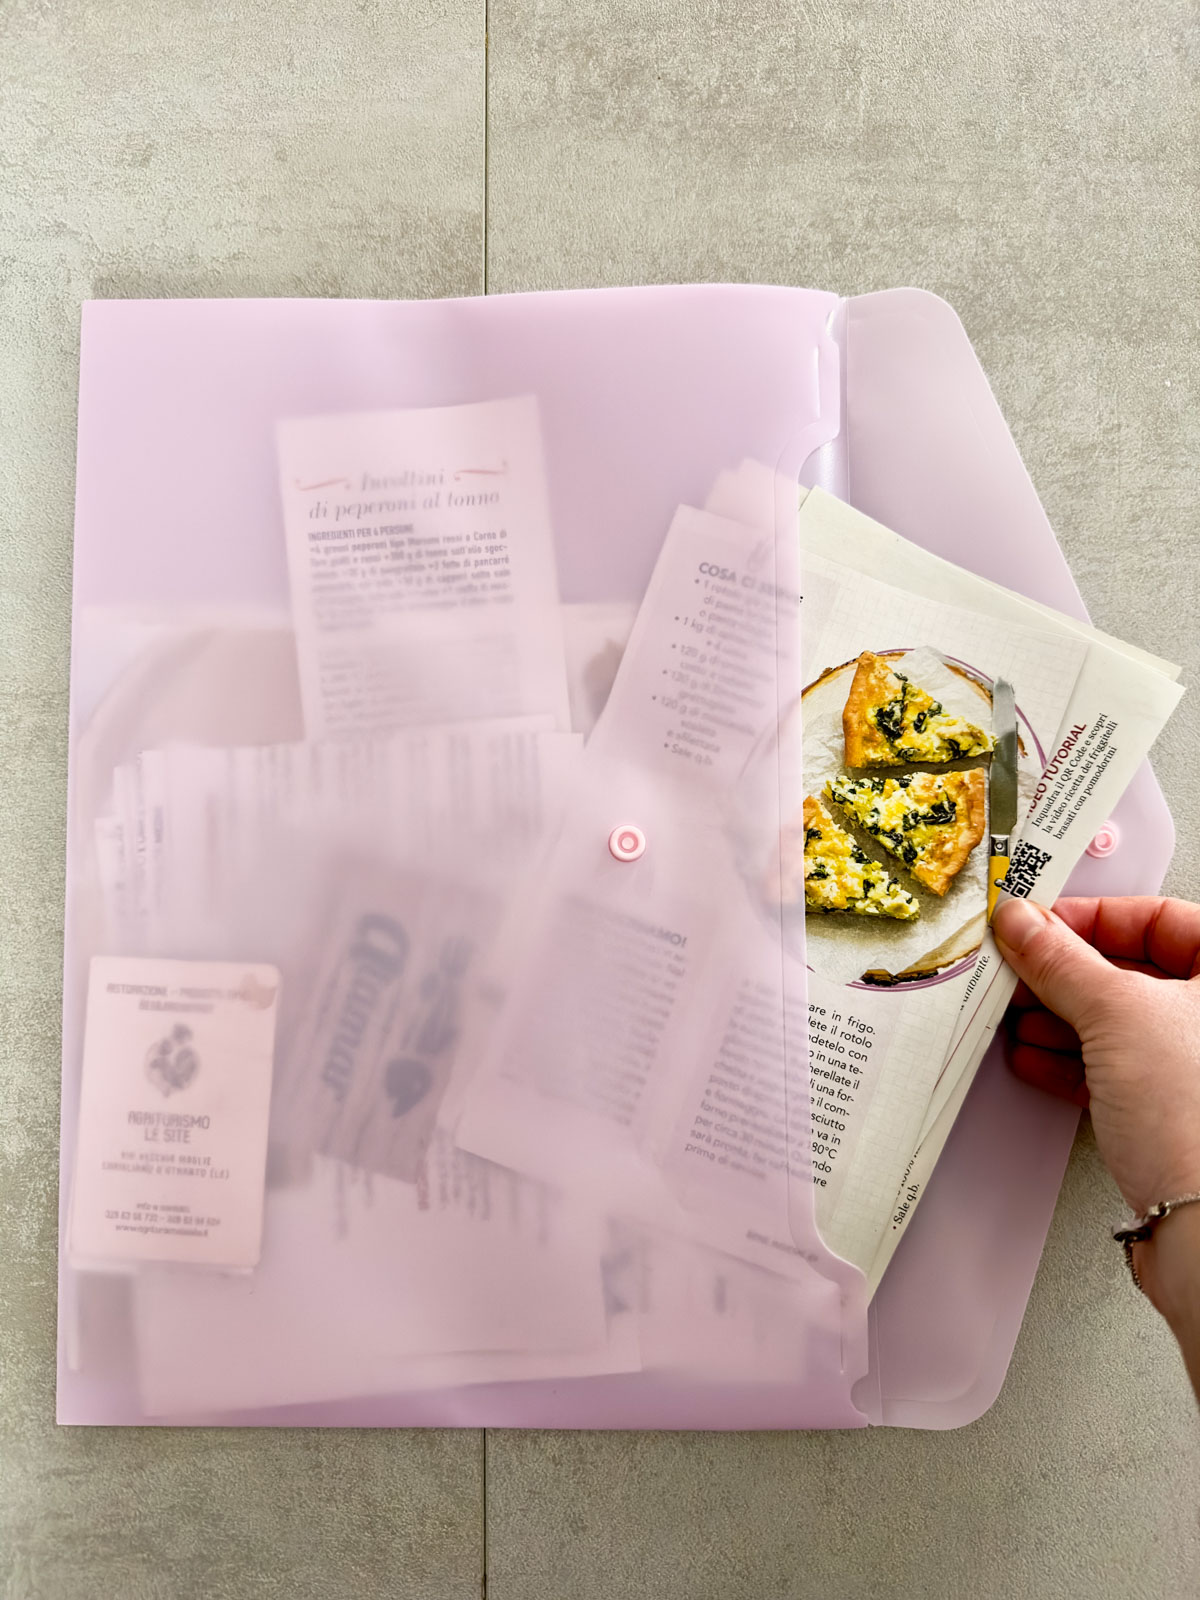 Store Recipes, Coupons, and Cards in a Dedicated Folder